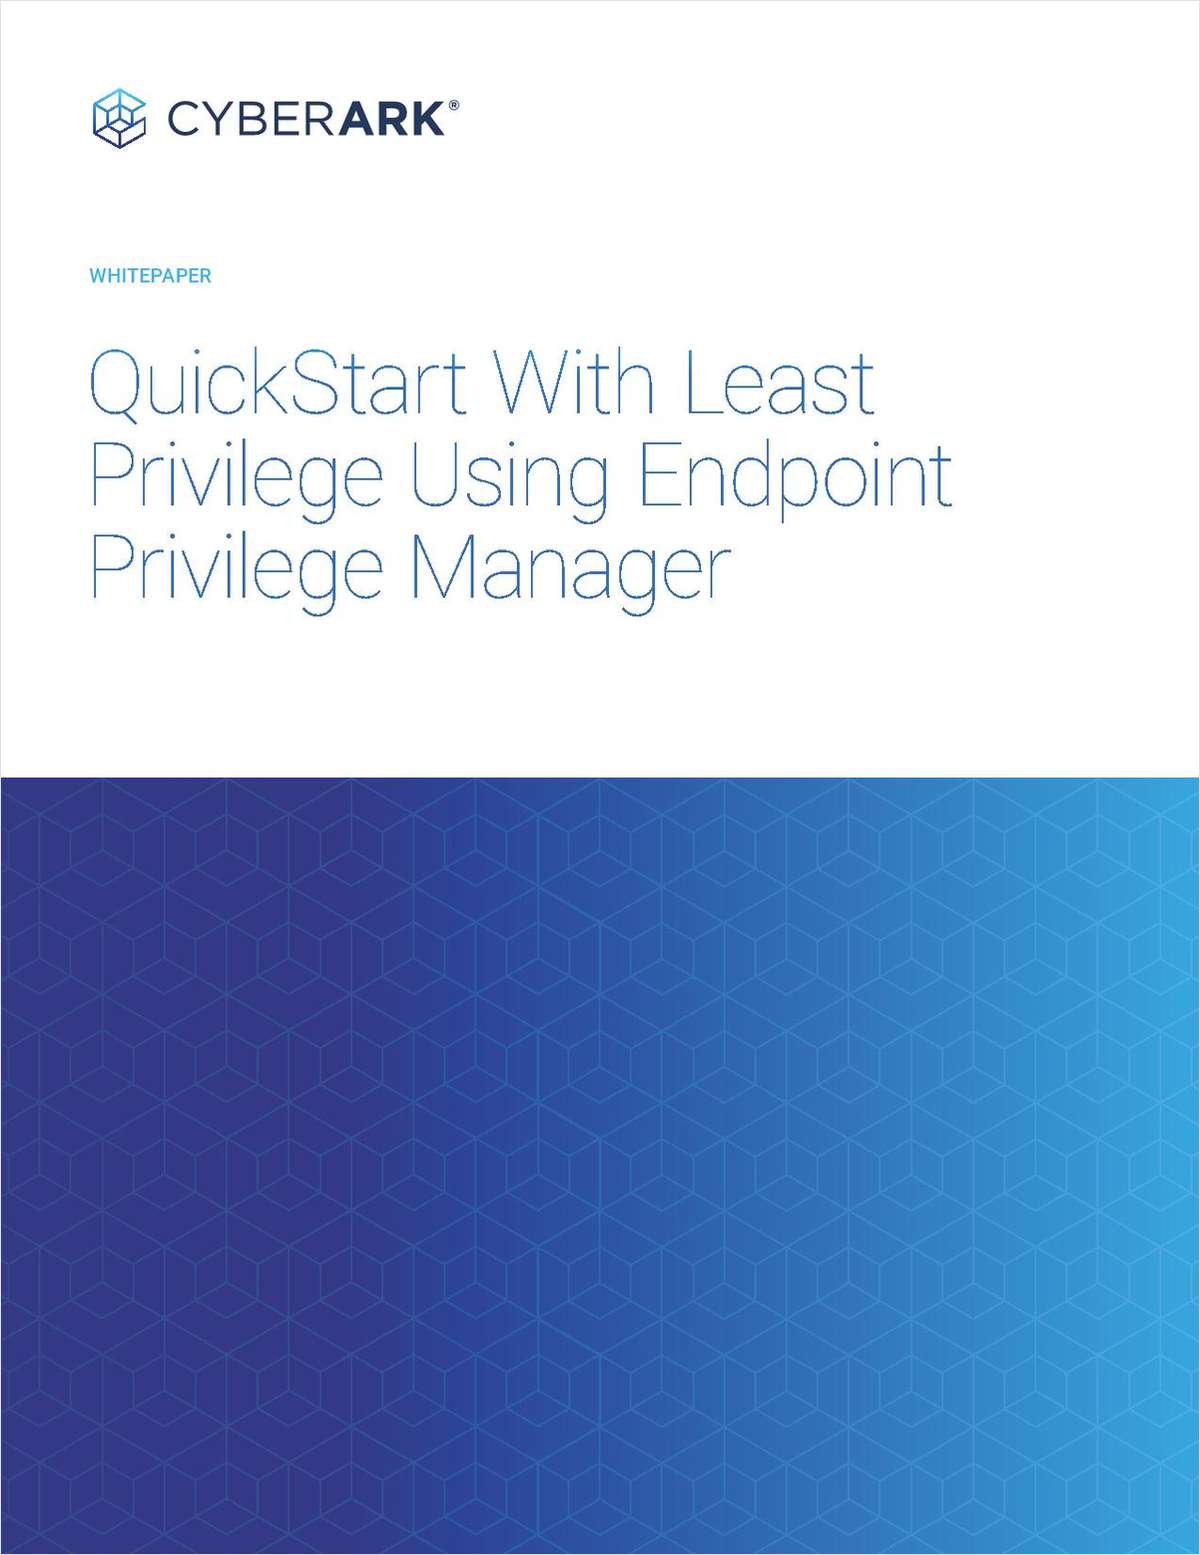 QuickStart With Least Privilege Using Endpoint Privilege Manager